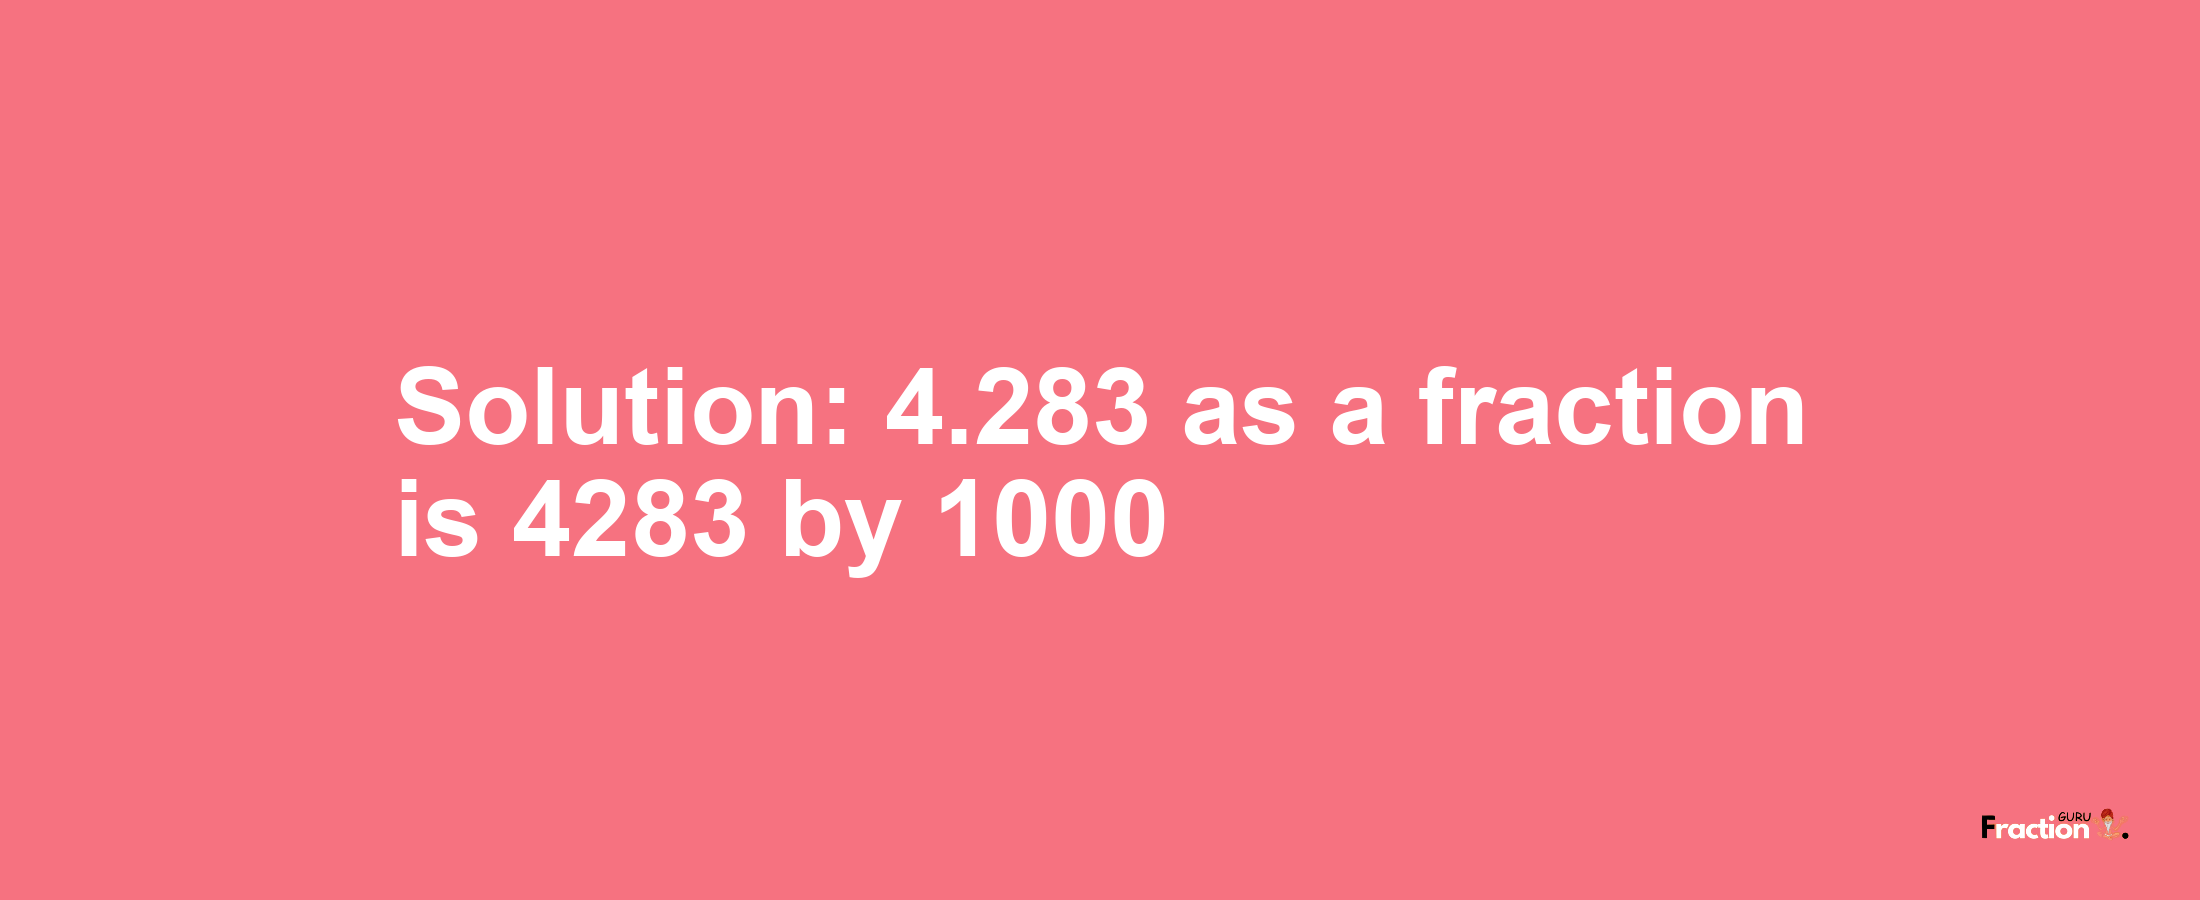 Solution:4.283 as a fraction is 4283/1000